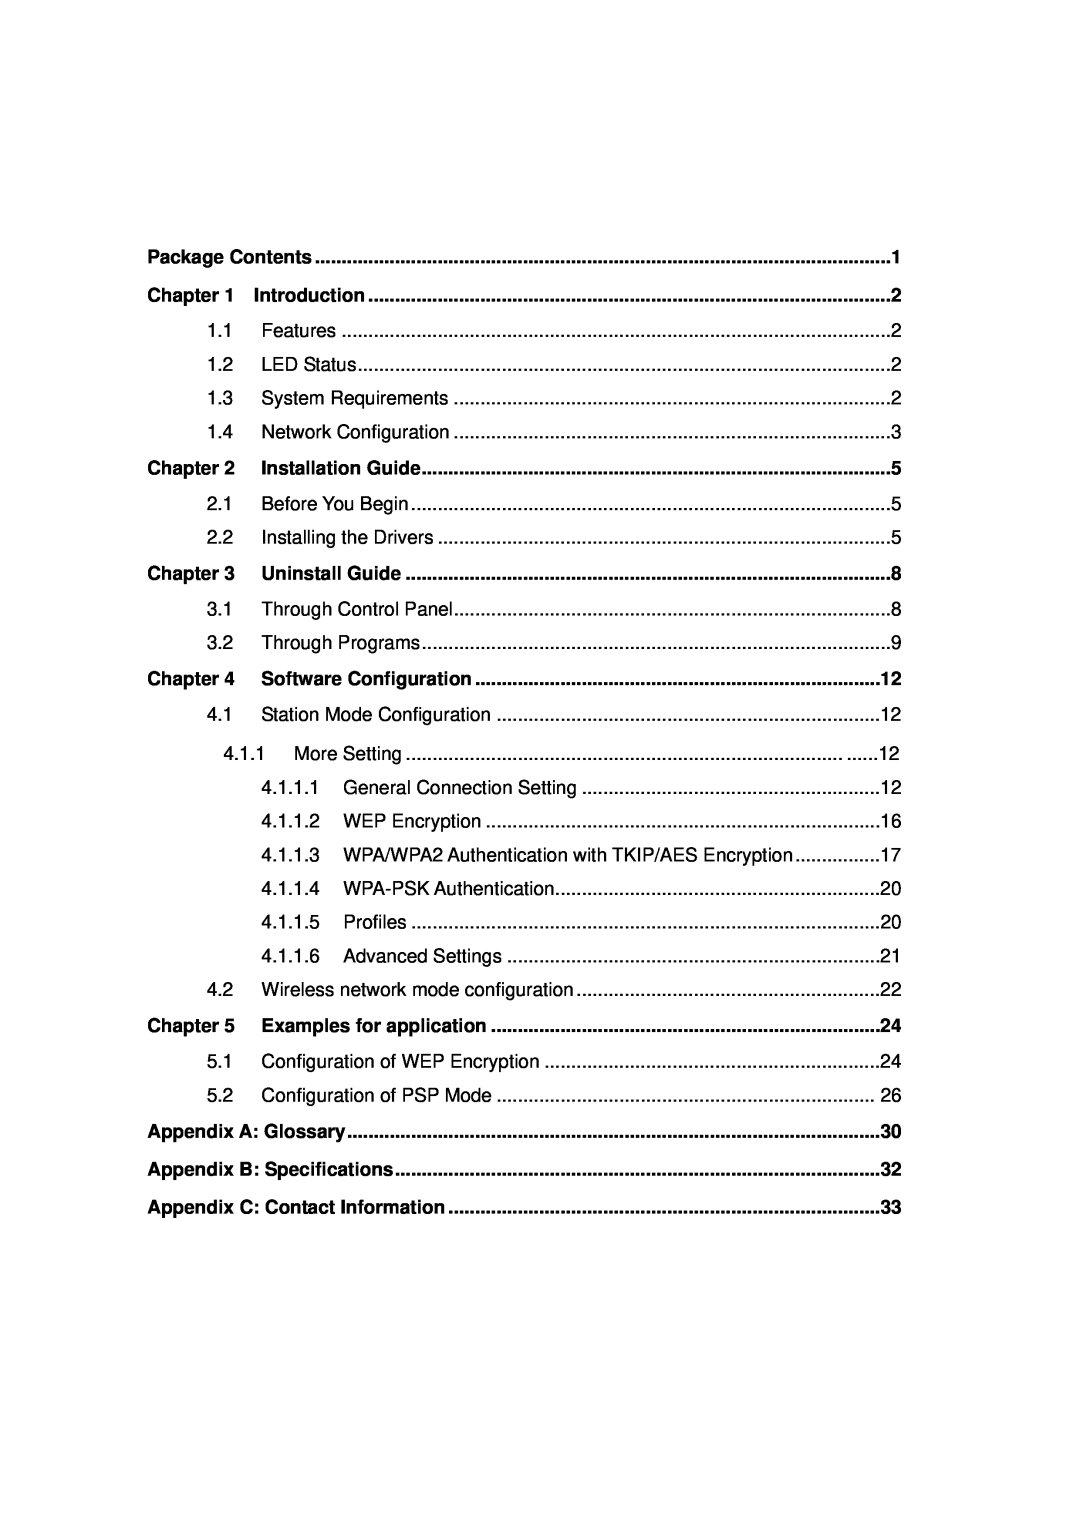 TP-Link TL-WN322G manual Chapter 